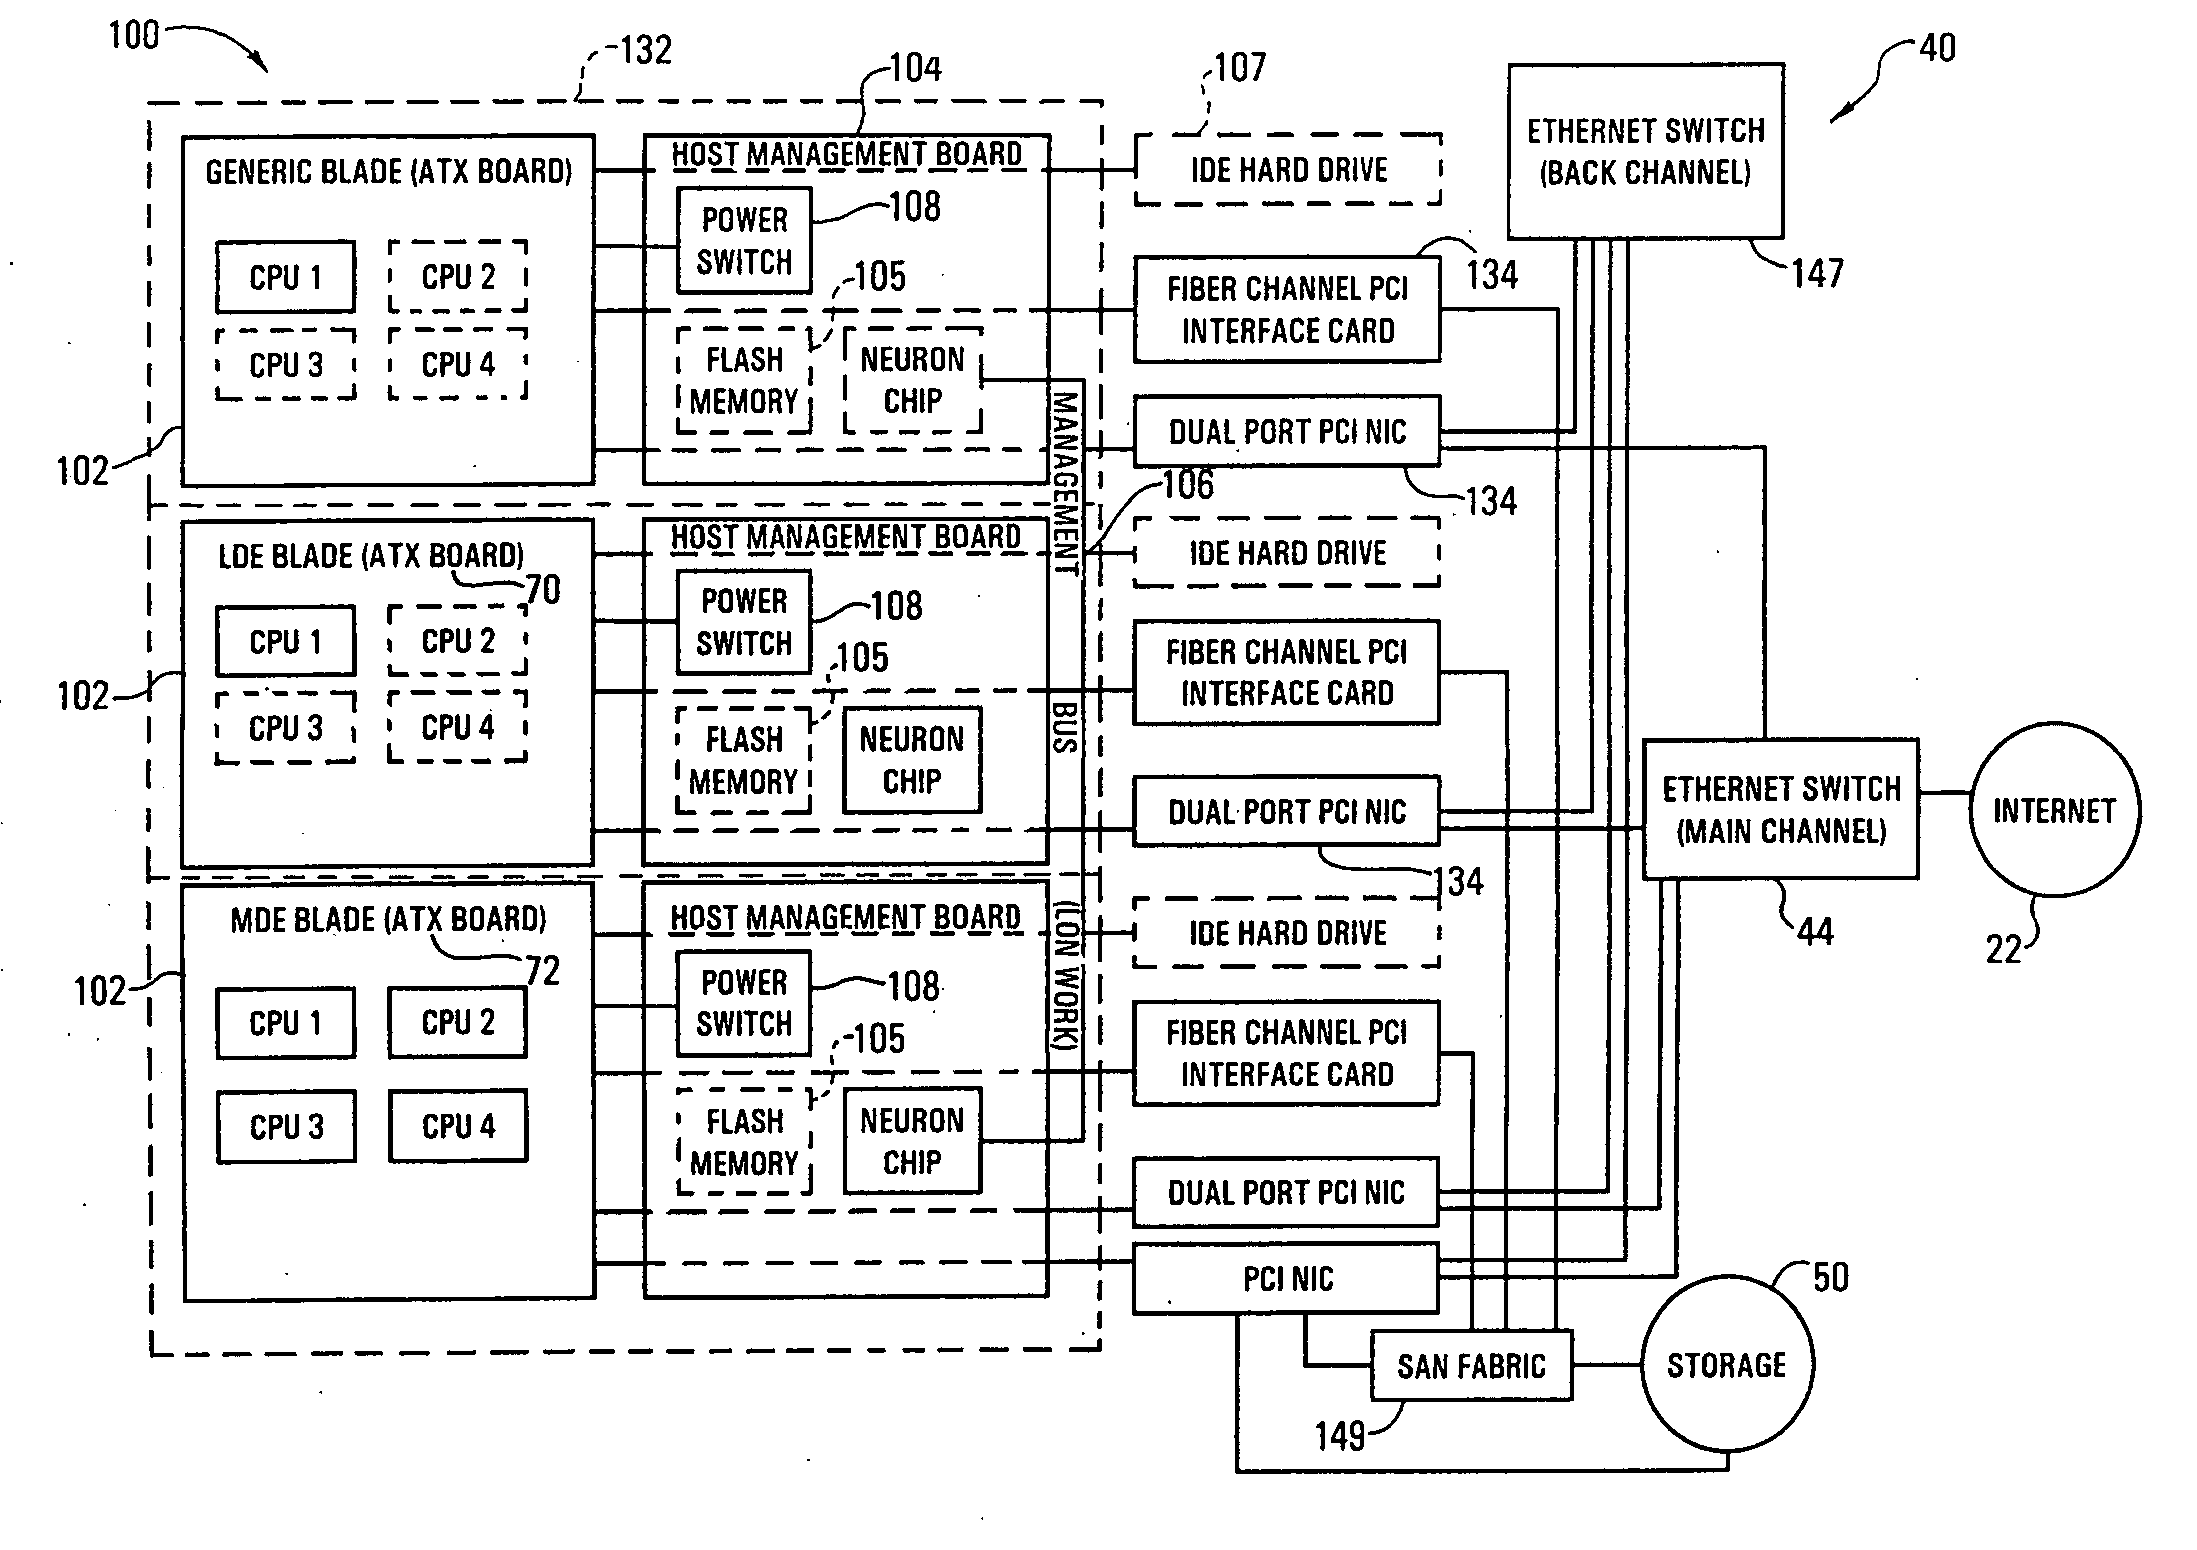 Method and system for providing dynamic hosted service management across disparate accounts/sites